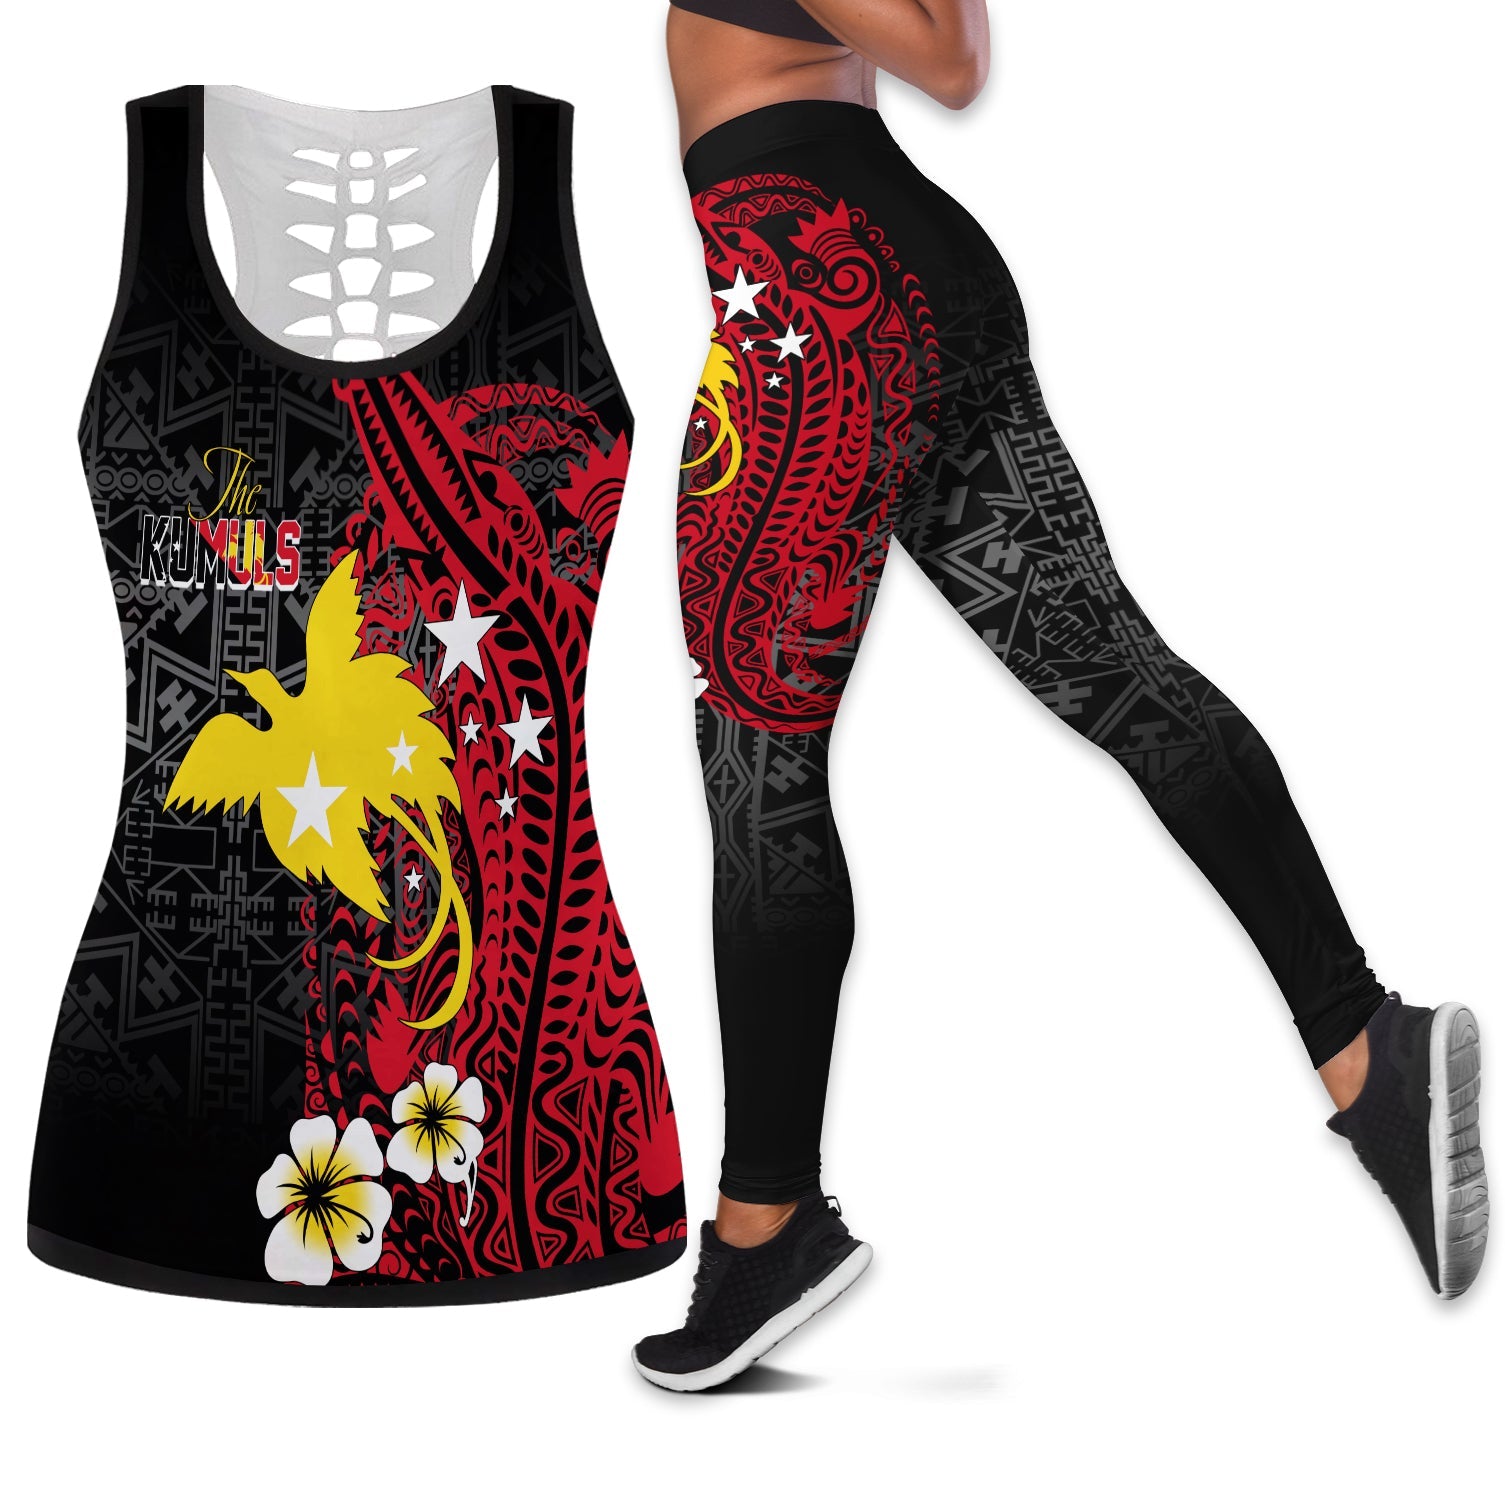 papua-new-guinea-independence-hollow-tank-and-leggings-combo-png-kumuls-crocodile-tattoo